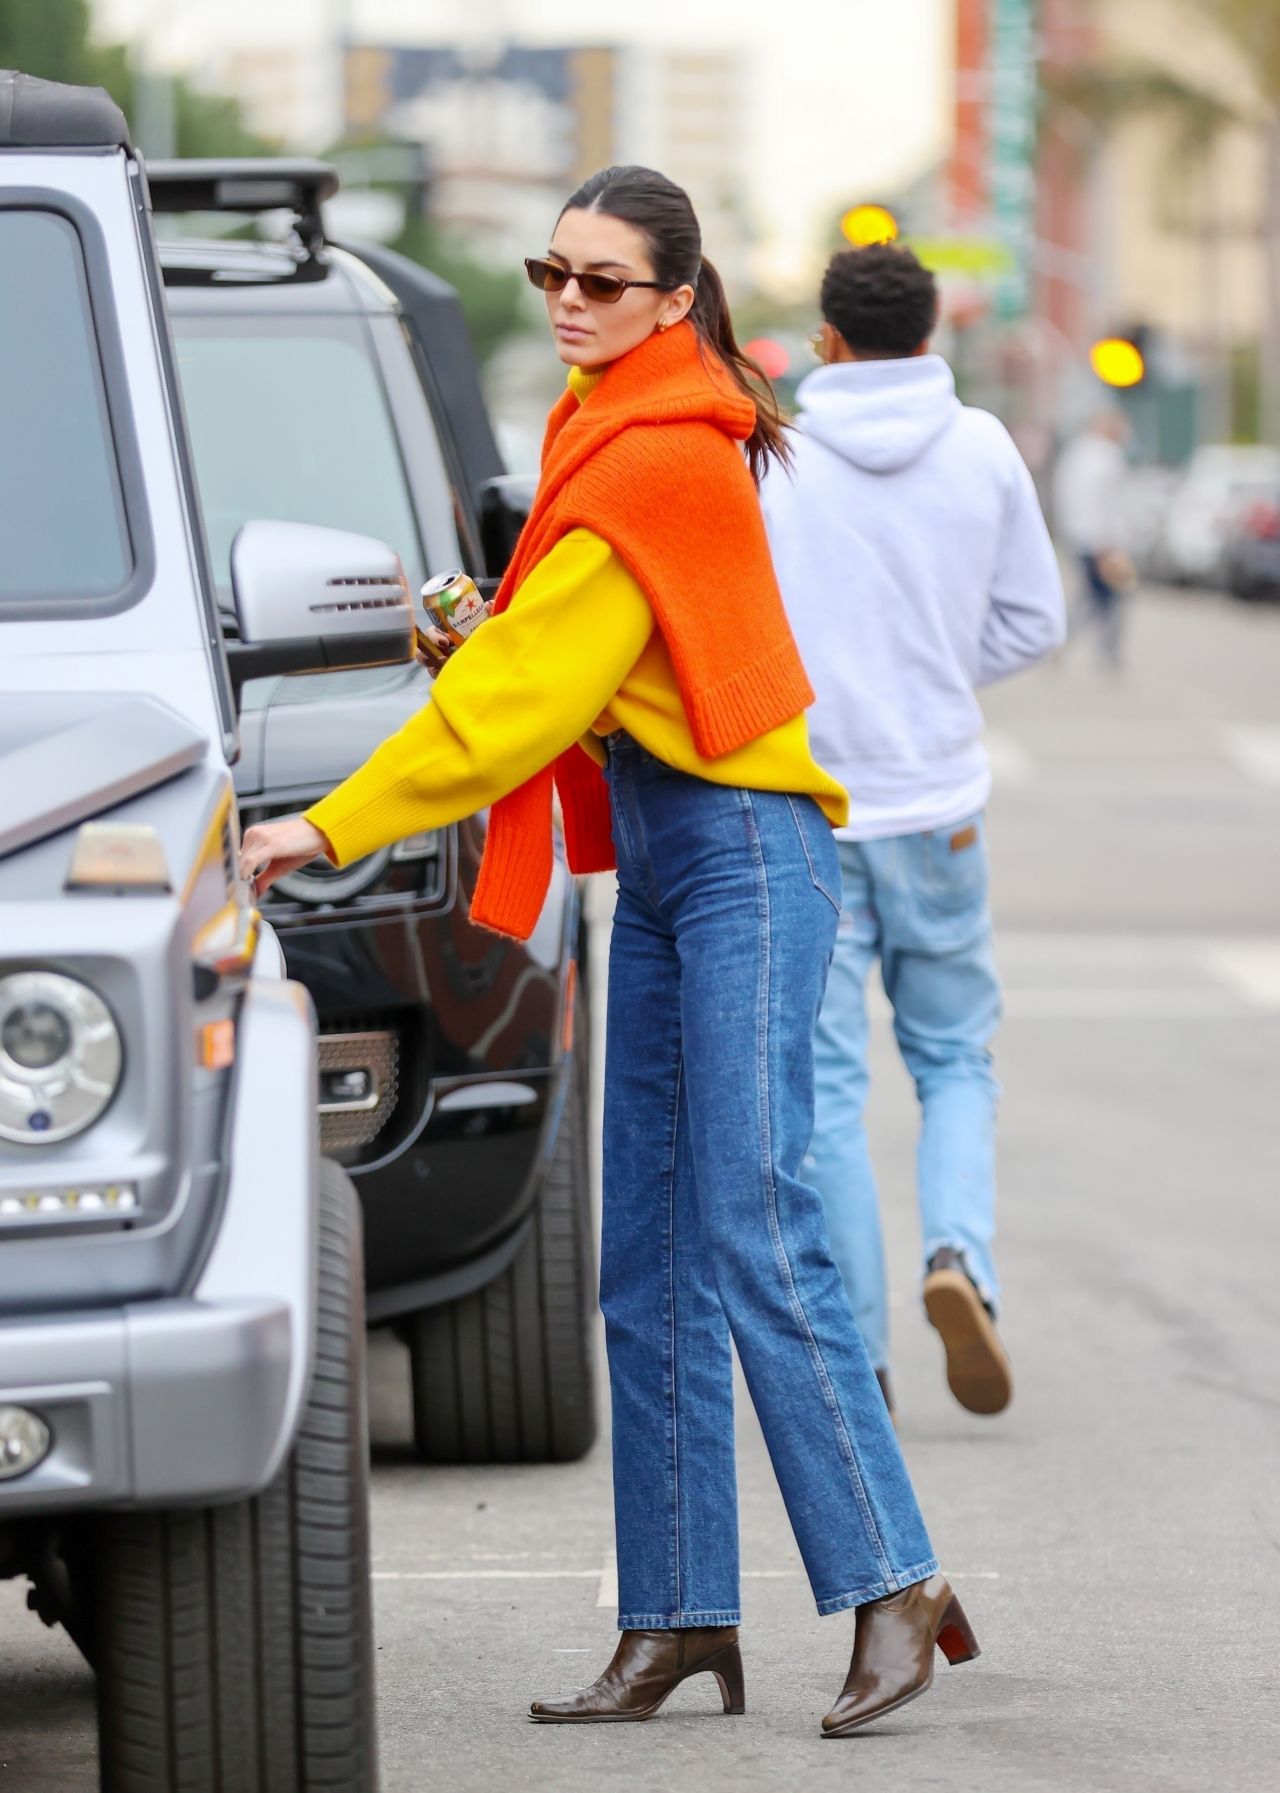 Kendall Jenner Los Angeles January 29, 2022 – Star Style